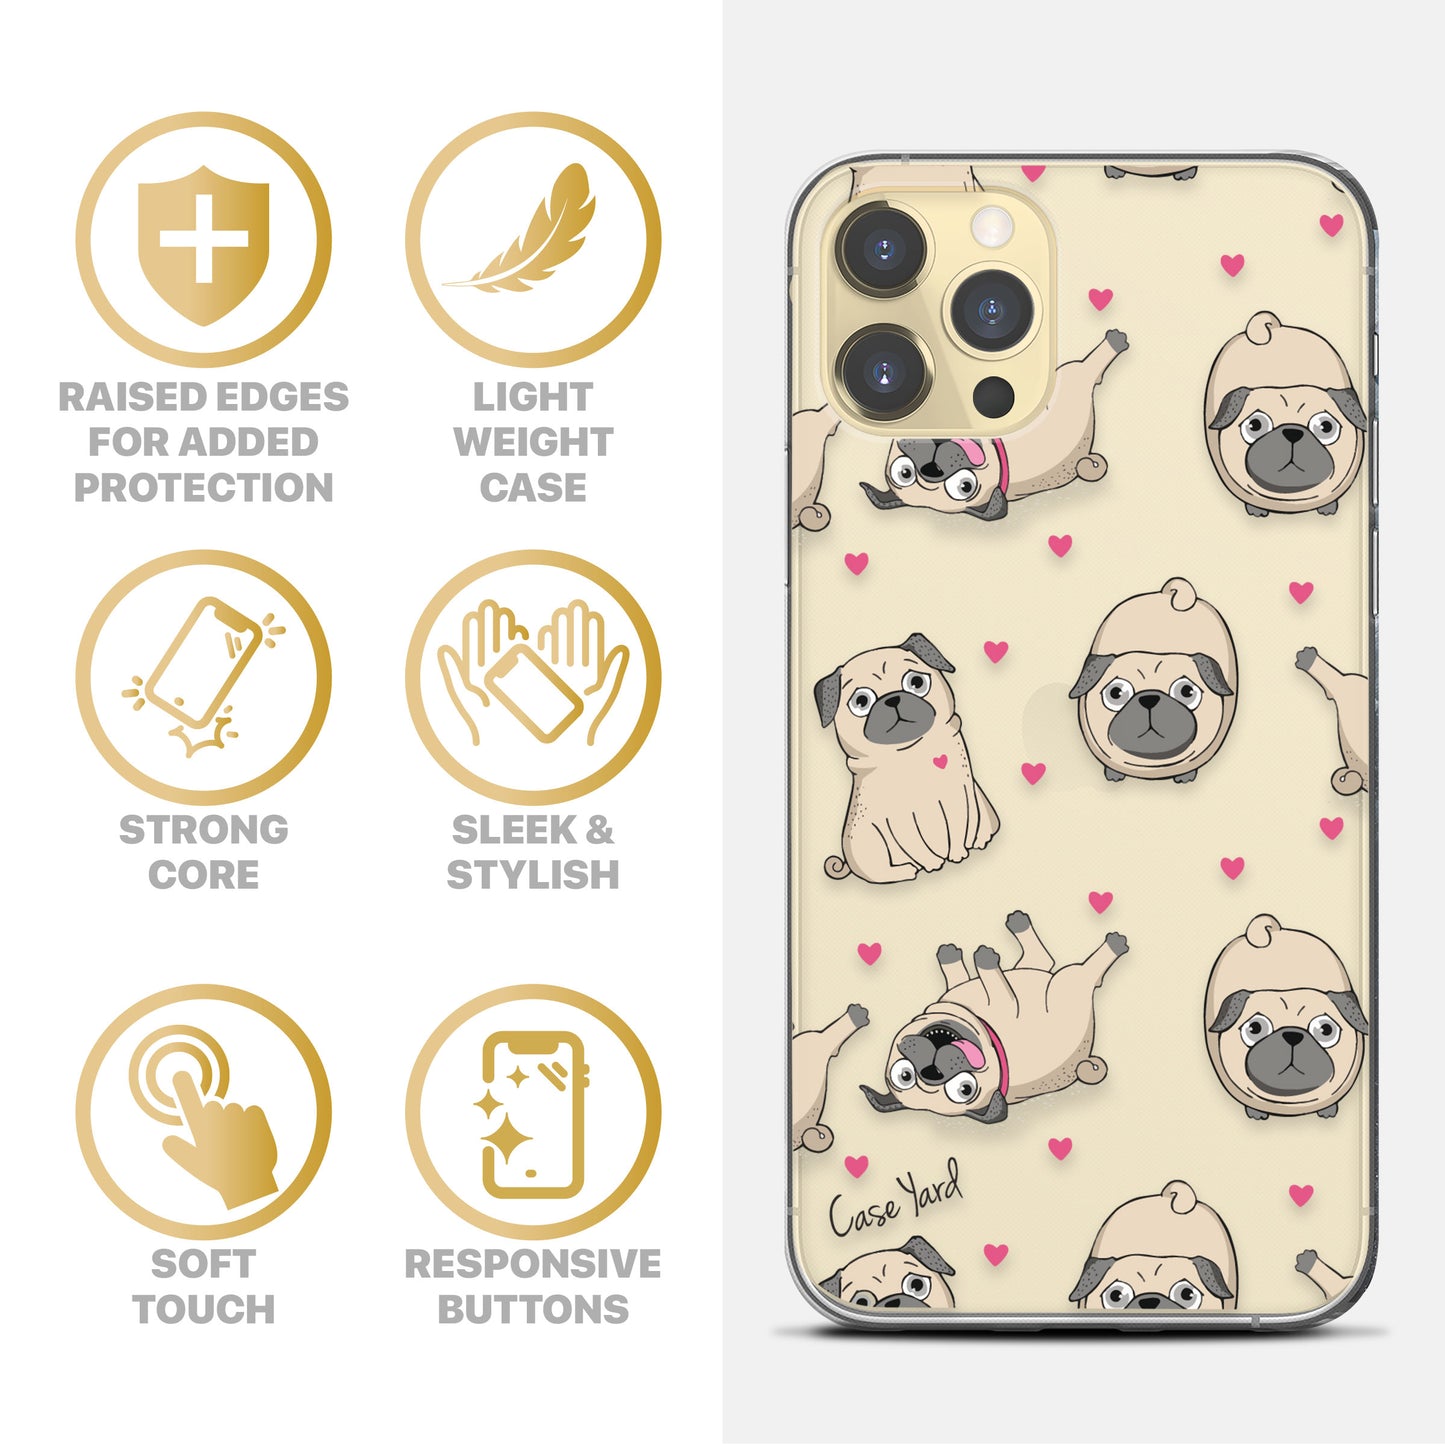 TPU Case Clear case with (Pug Pattern) Design for iPhone & Samsung Phones